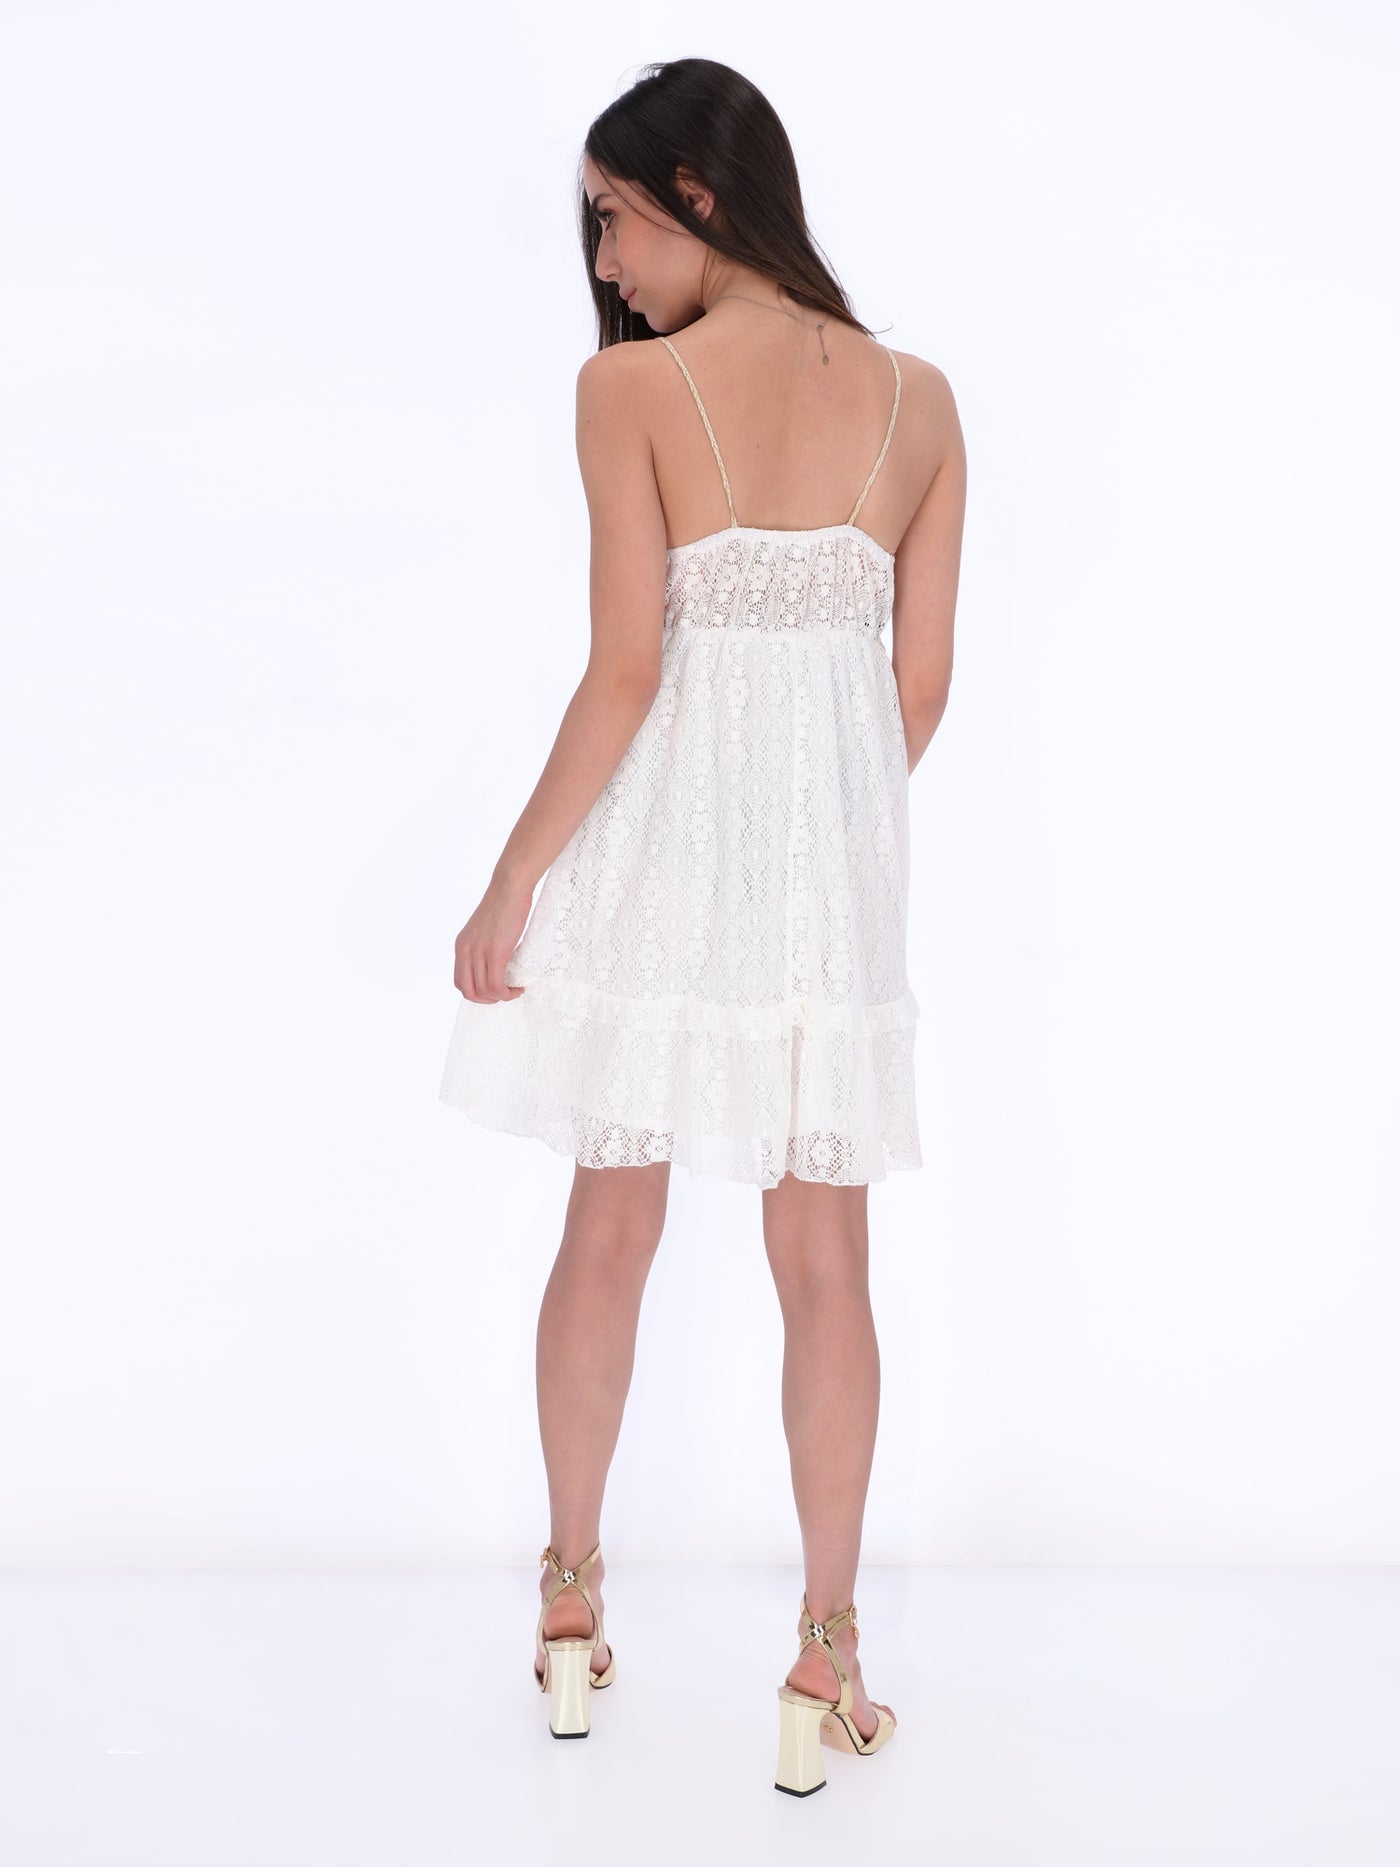 Crochet Lace Midi Skater Dress with Tassles and Braided Neckline